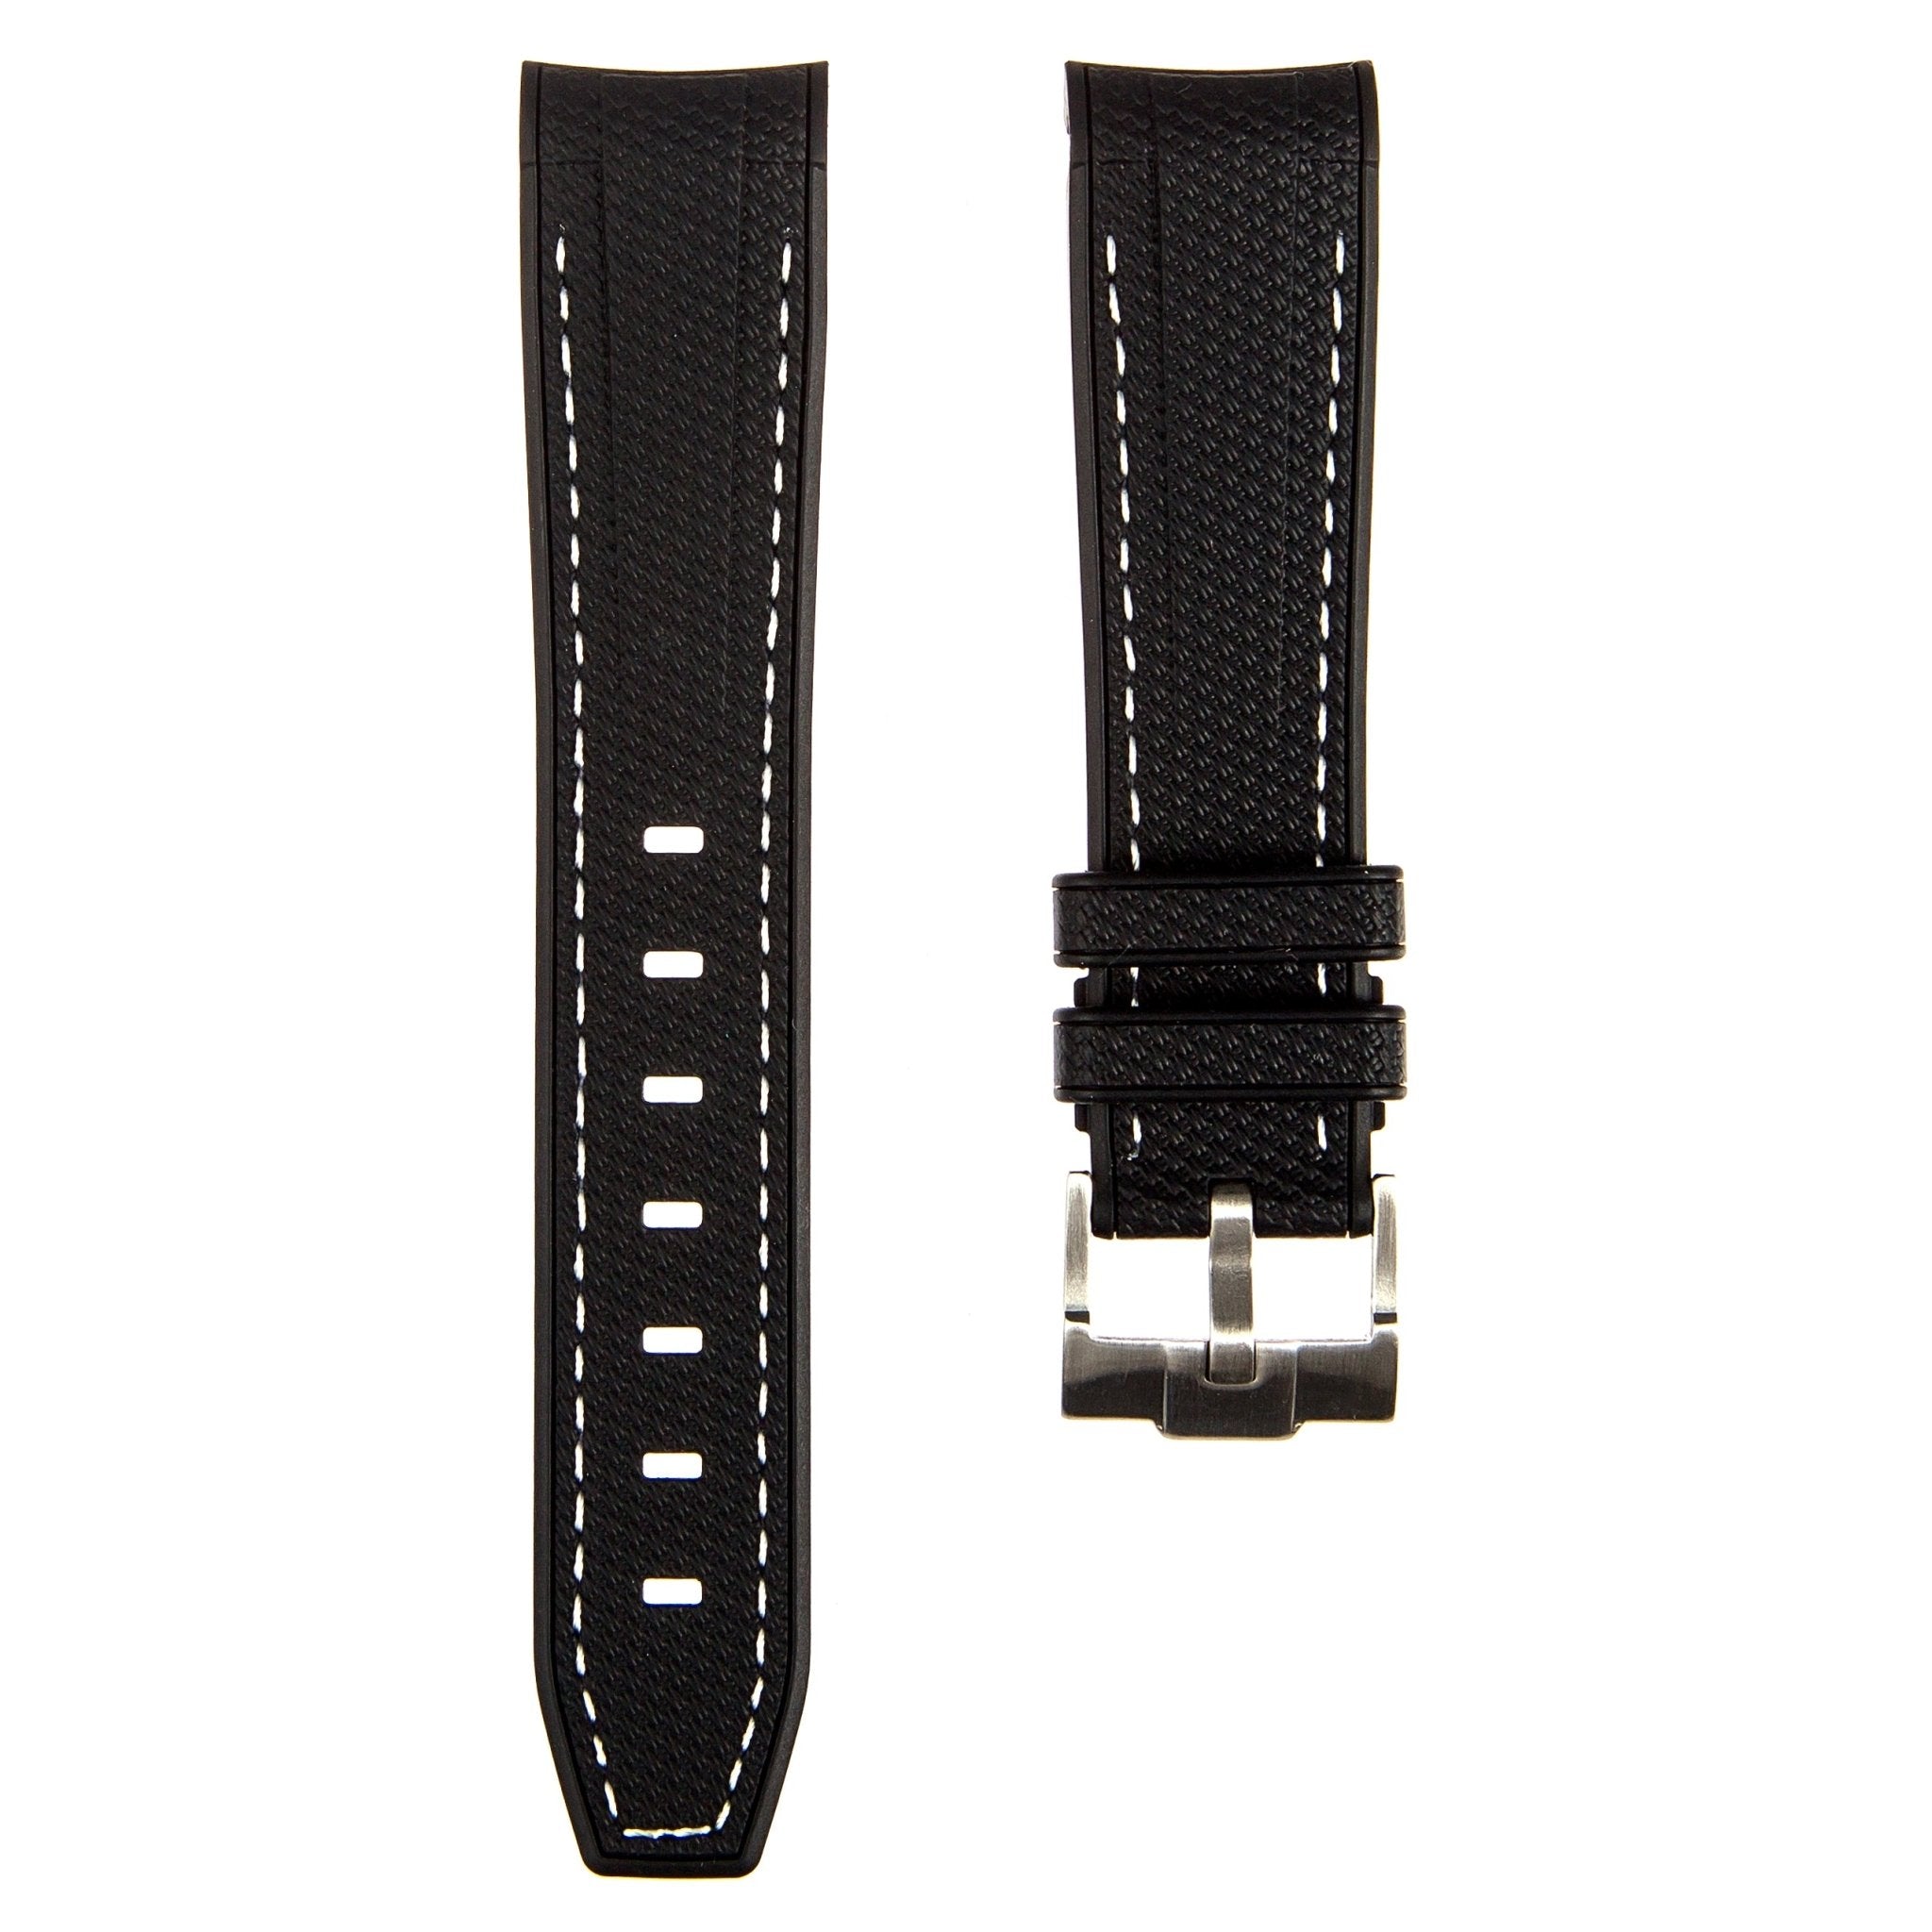 Textured Curved End Premium Silicone Strap - Compatible with Omega x Swatch - Black with White Stitch (2405) -StrapSeeker